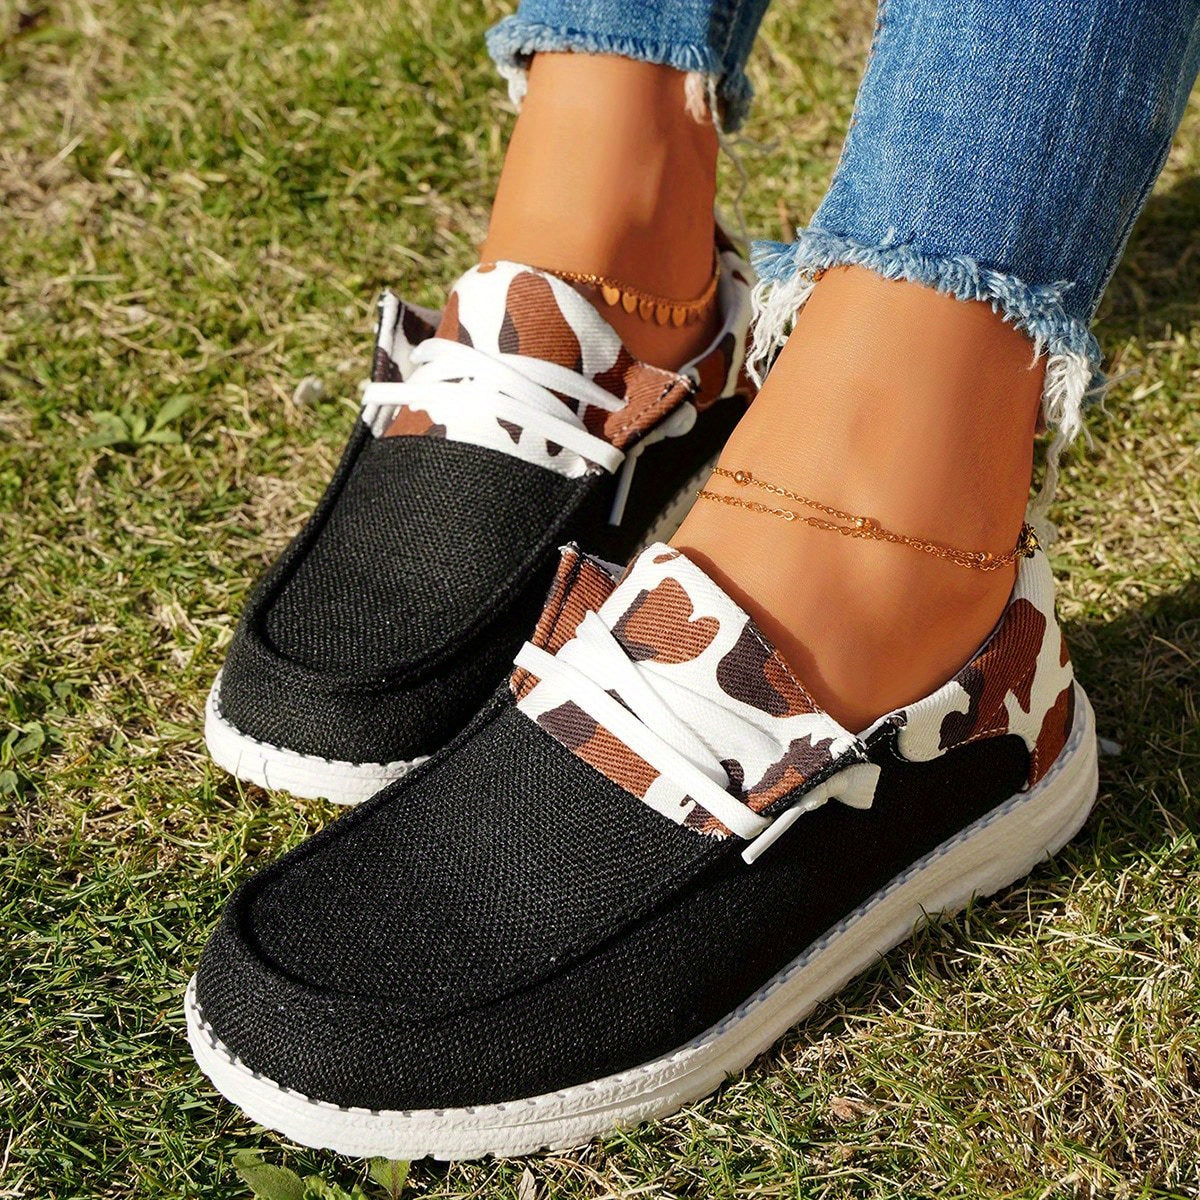 Cow Pattern Canvas Shoes, Trendy Lace Up Sneakers